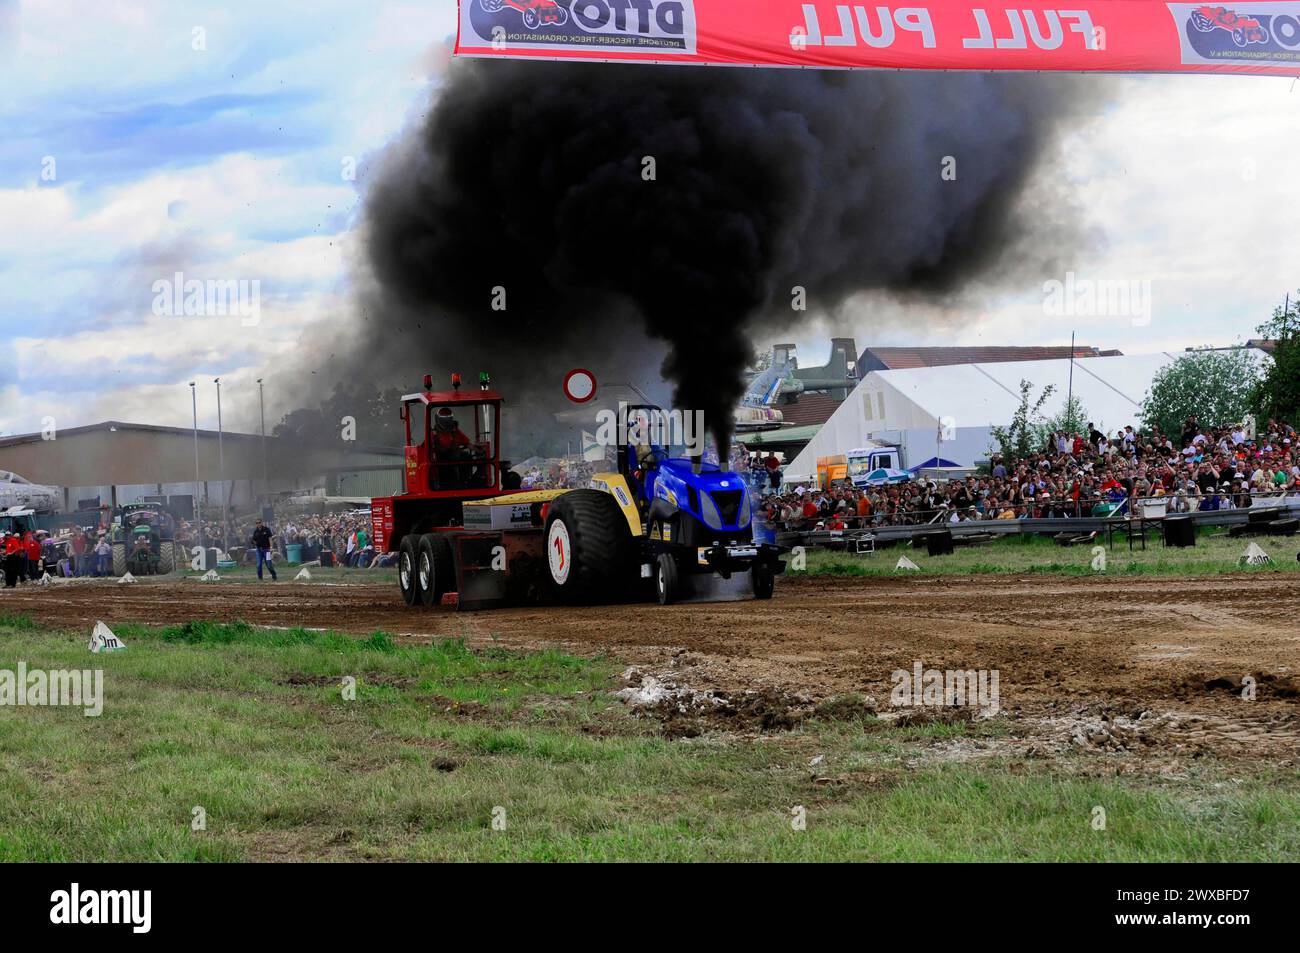 17 May 2009 Seifertshofen 2nd round of the German Championship, Wild Star Free Class 3, 5 t, Powerful tractor pulls a load during Tractor Pulling Stock Photo